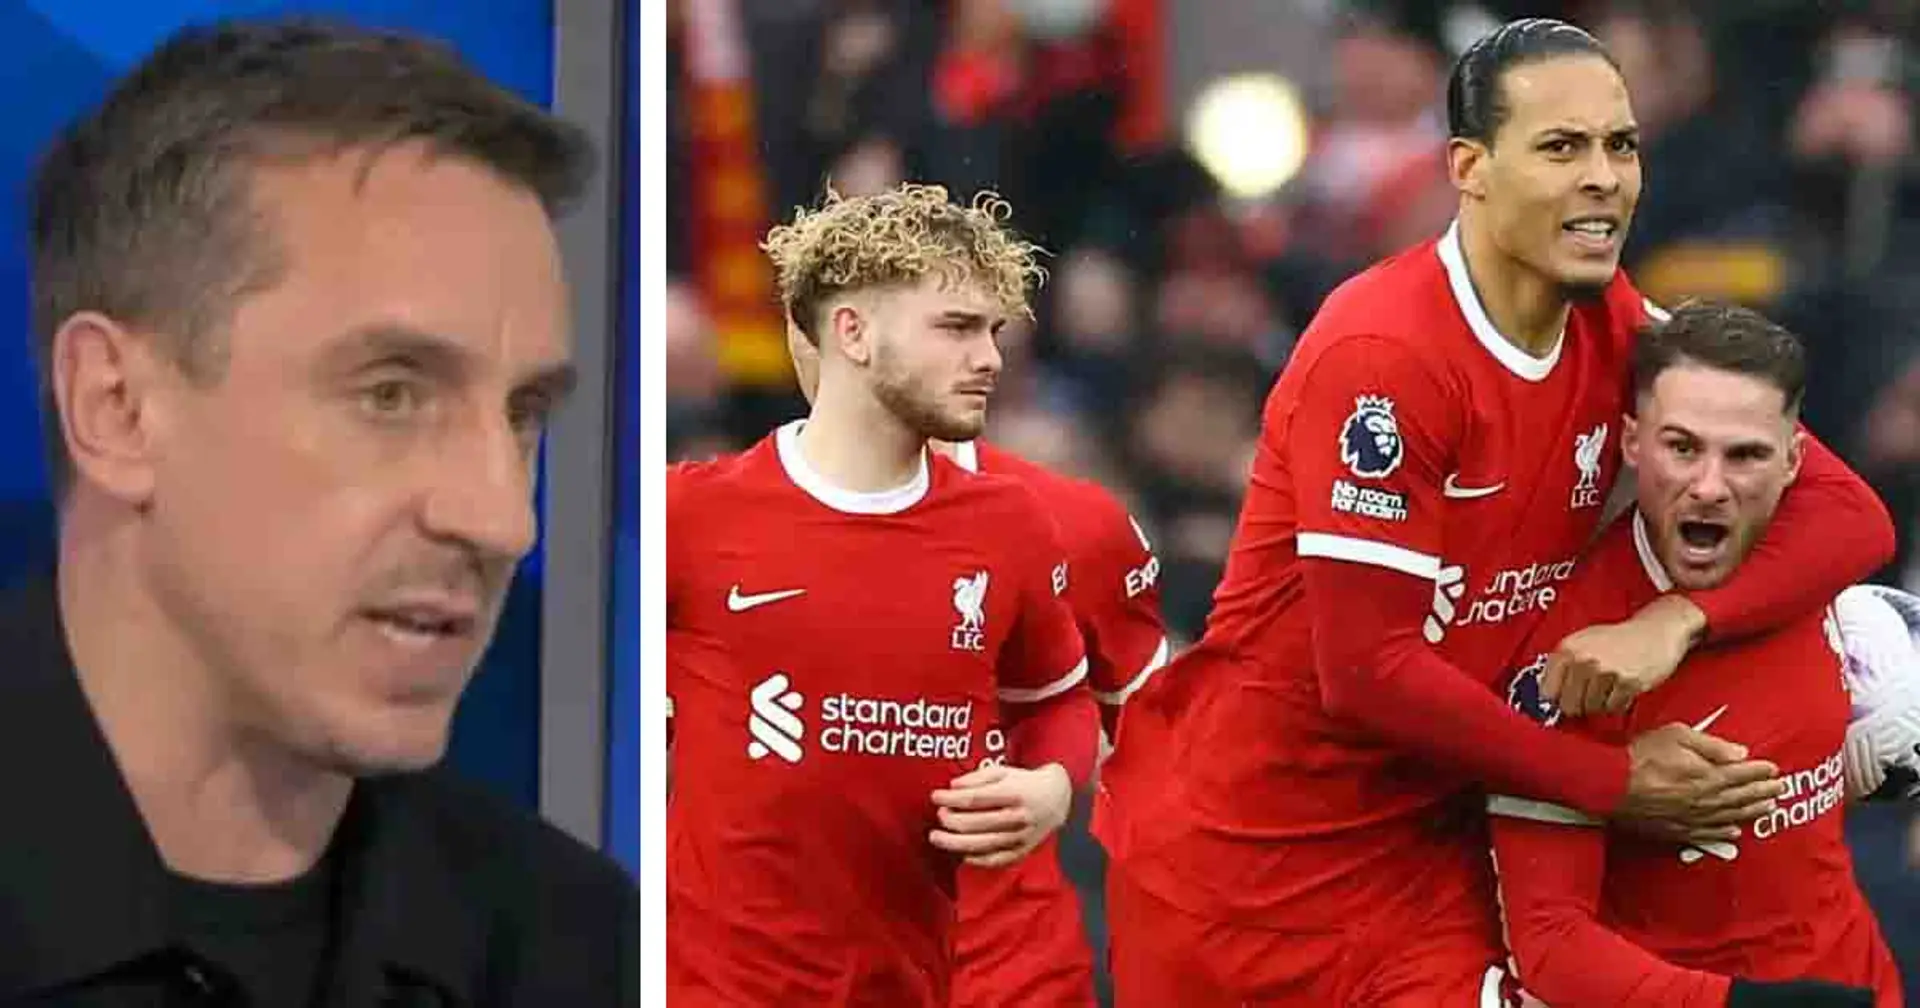 'Would bring a dominance to the team': Gary Neville names current Liverpool player he'd want at Man United